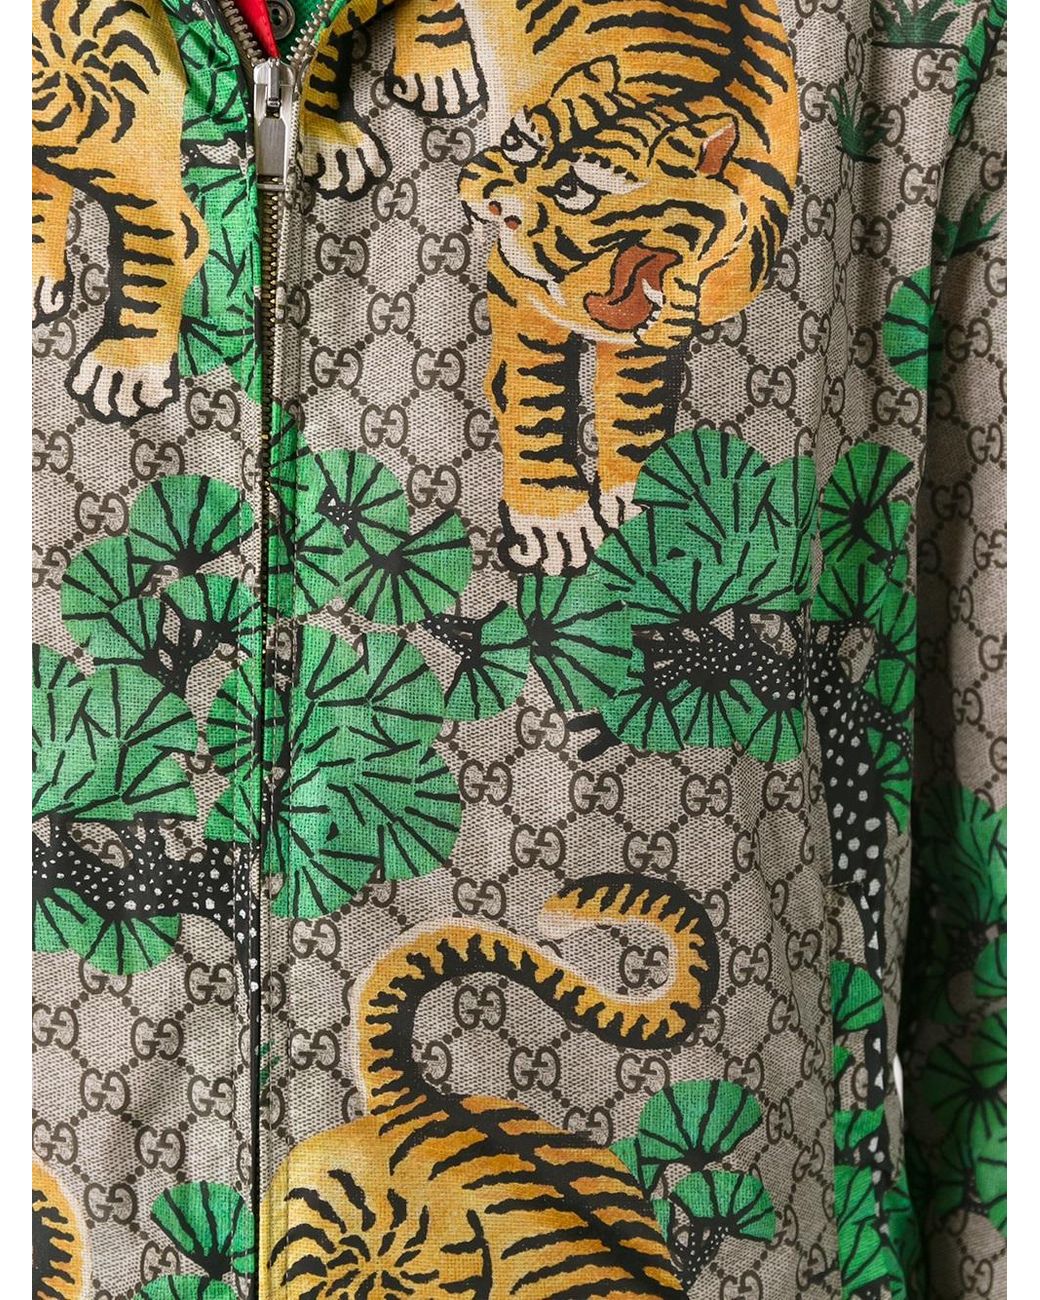 Gucci Bengal Tiger Print Jacket in Green for Men | Lyst